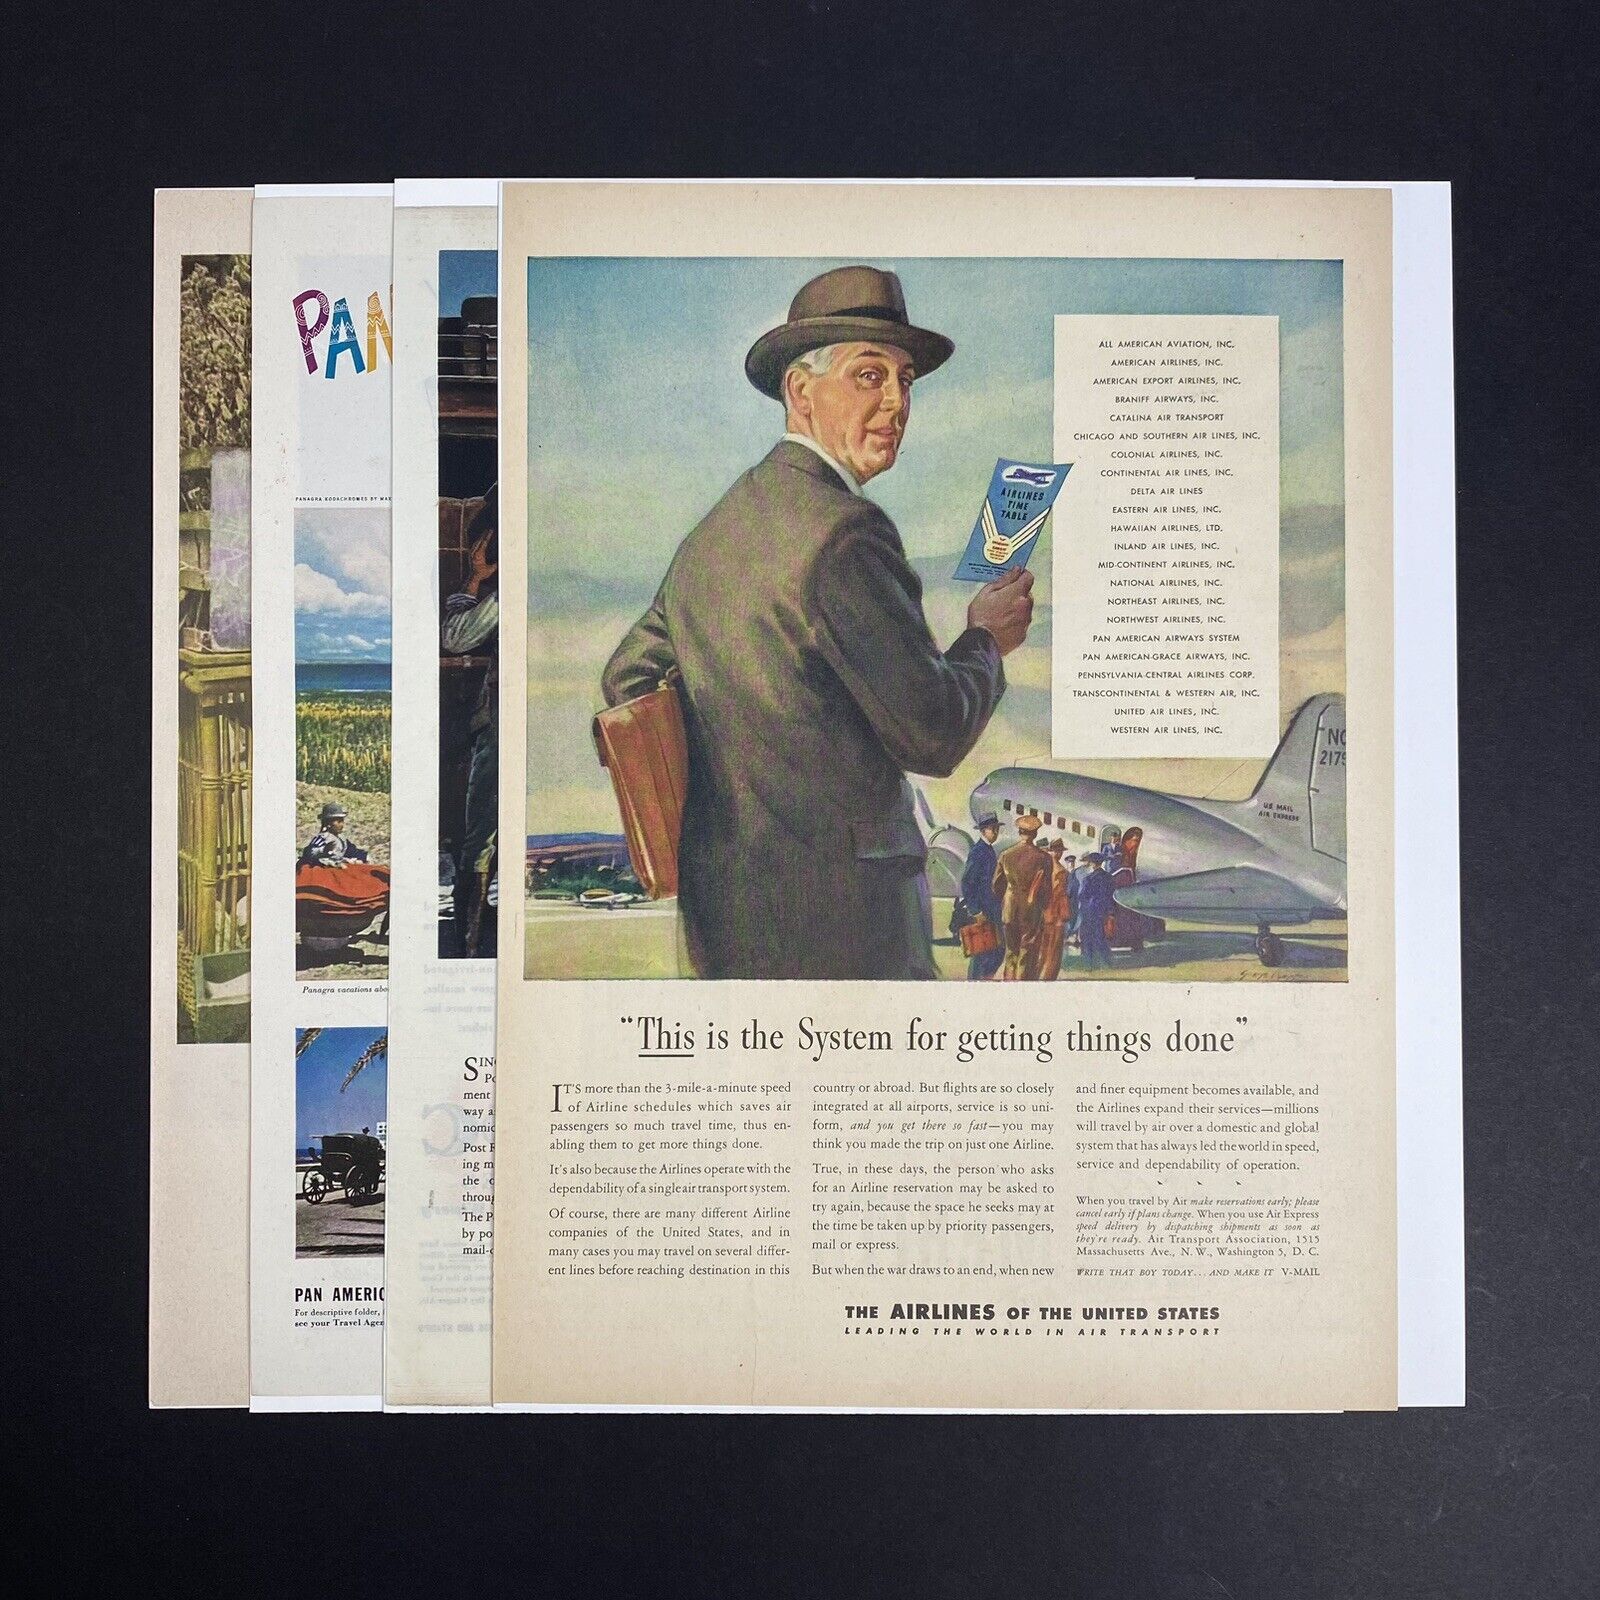 Vintage 40s Airlines Of The United States Magazine Ad (Lot of 4) Pan Am, DC-7